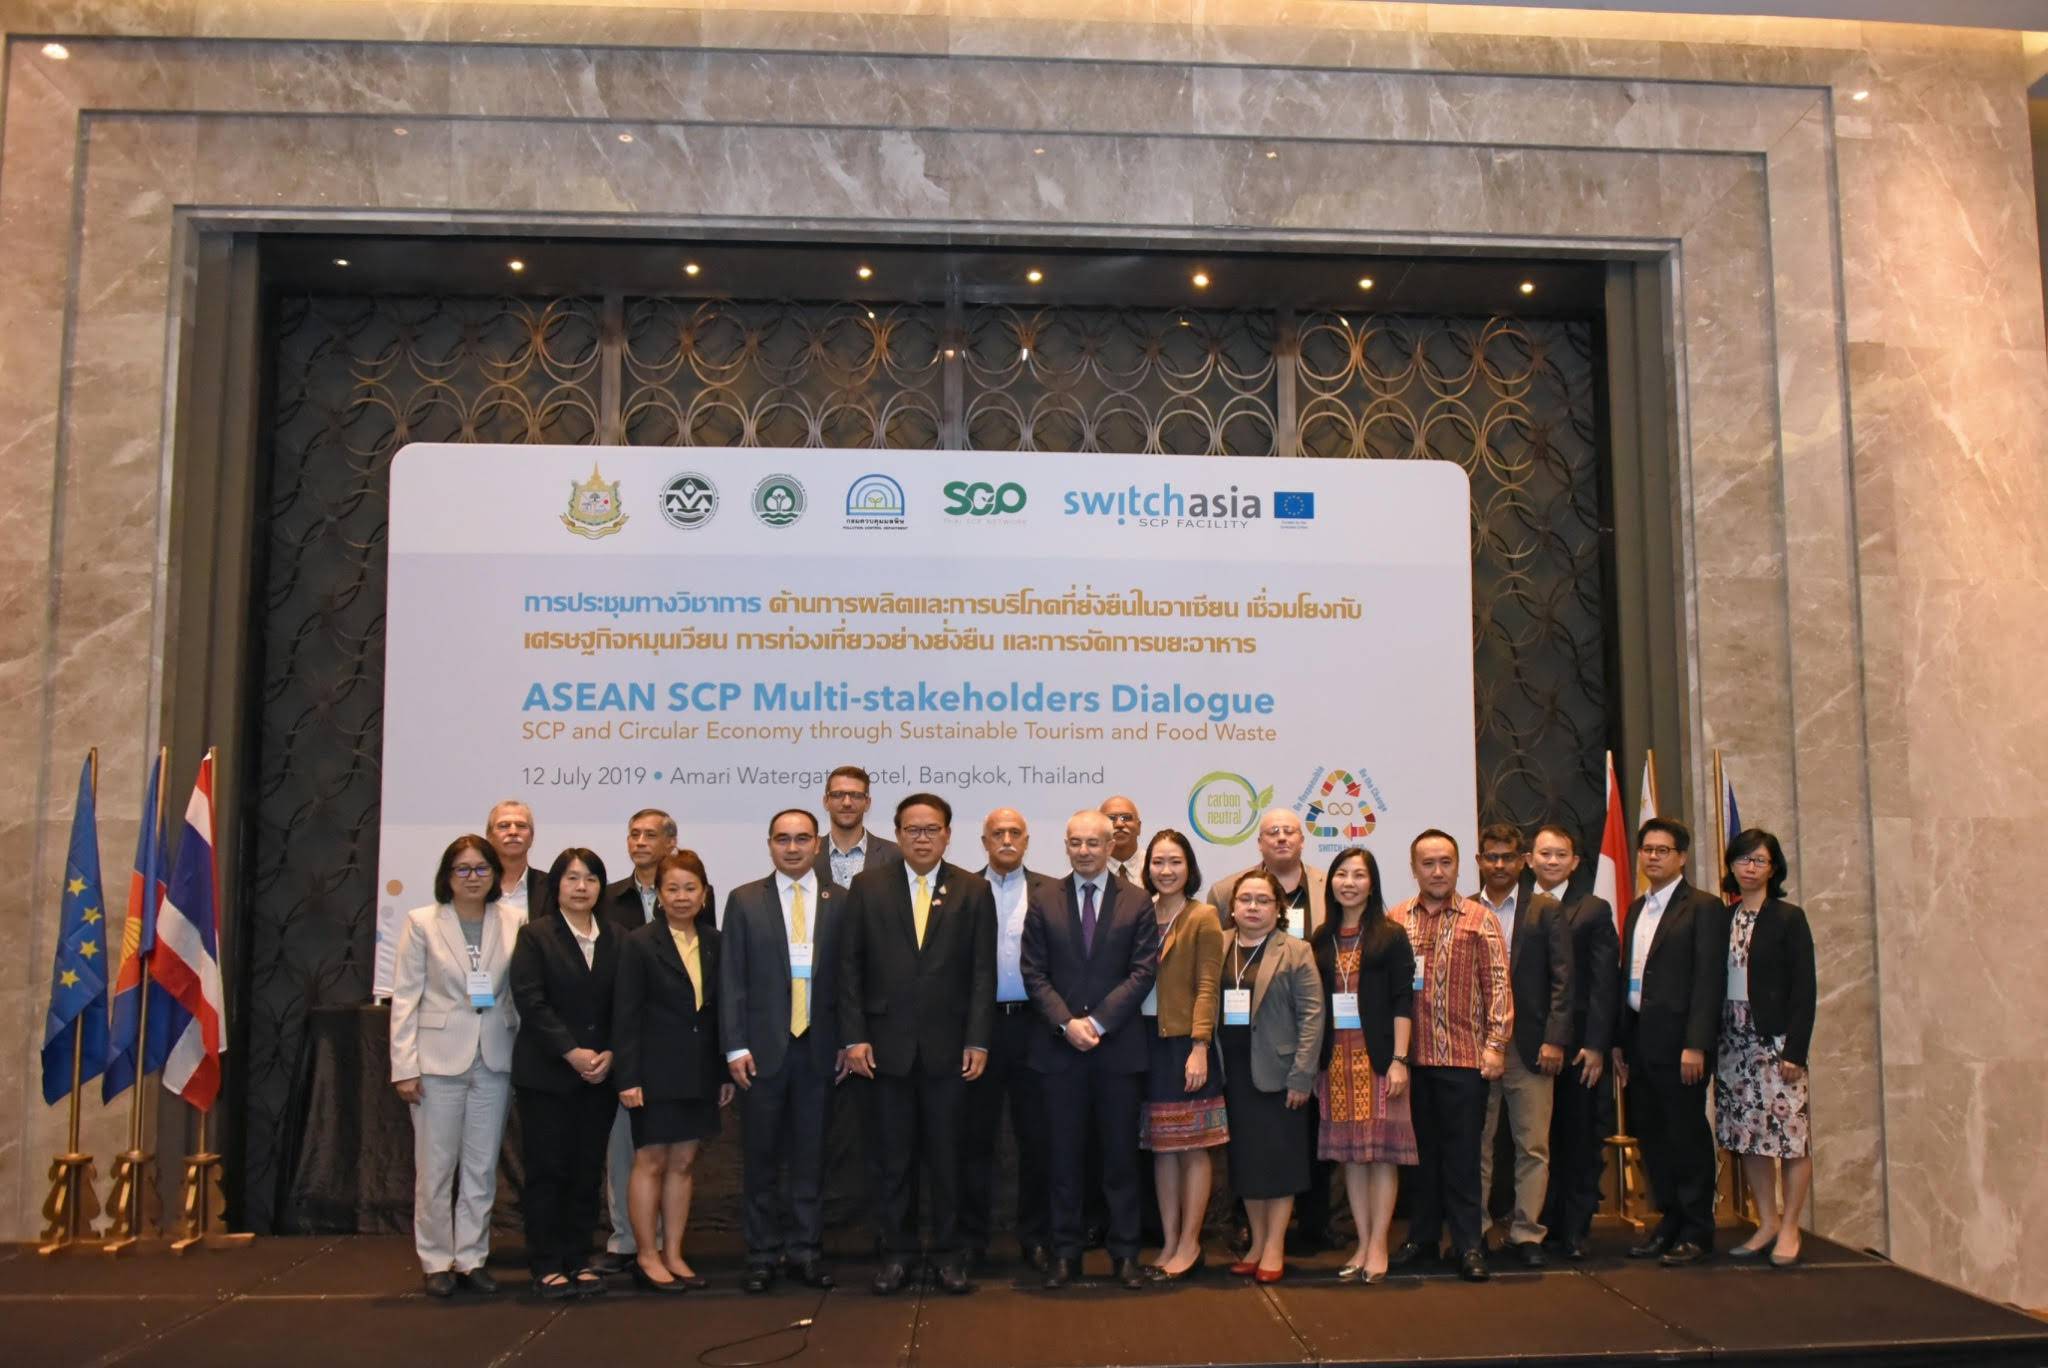 Promising developments in ASEAN’s transition to SCP and Circular Economy